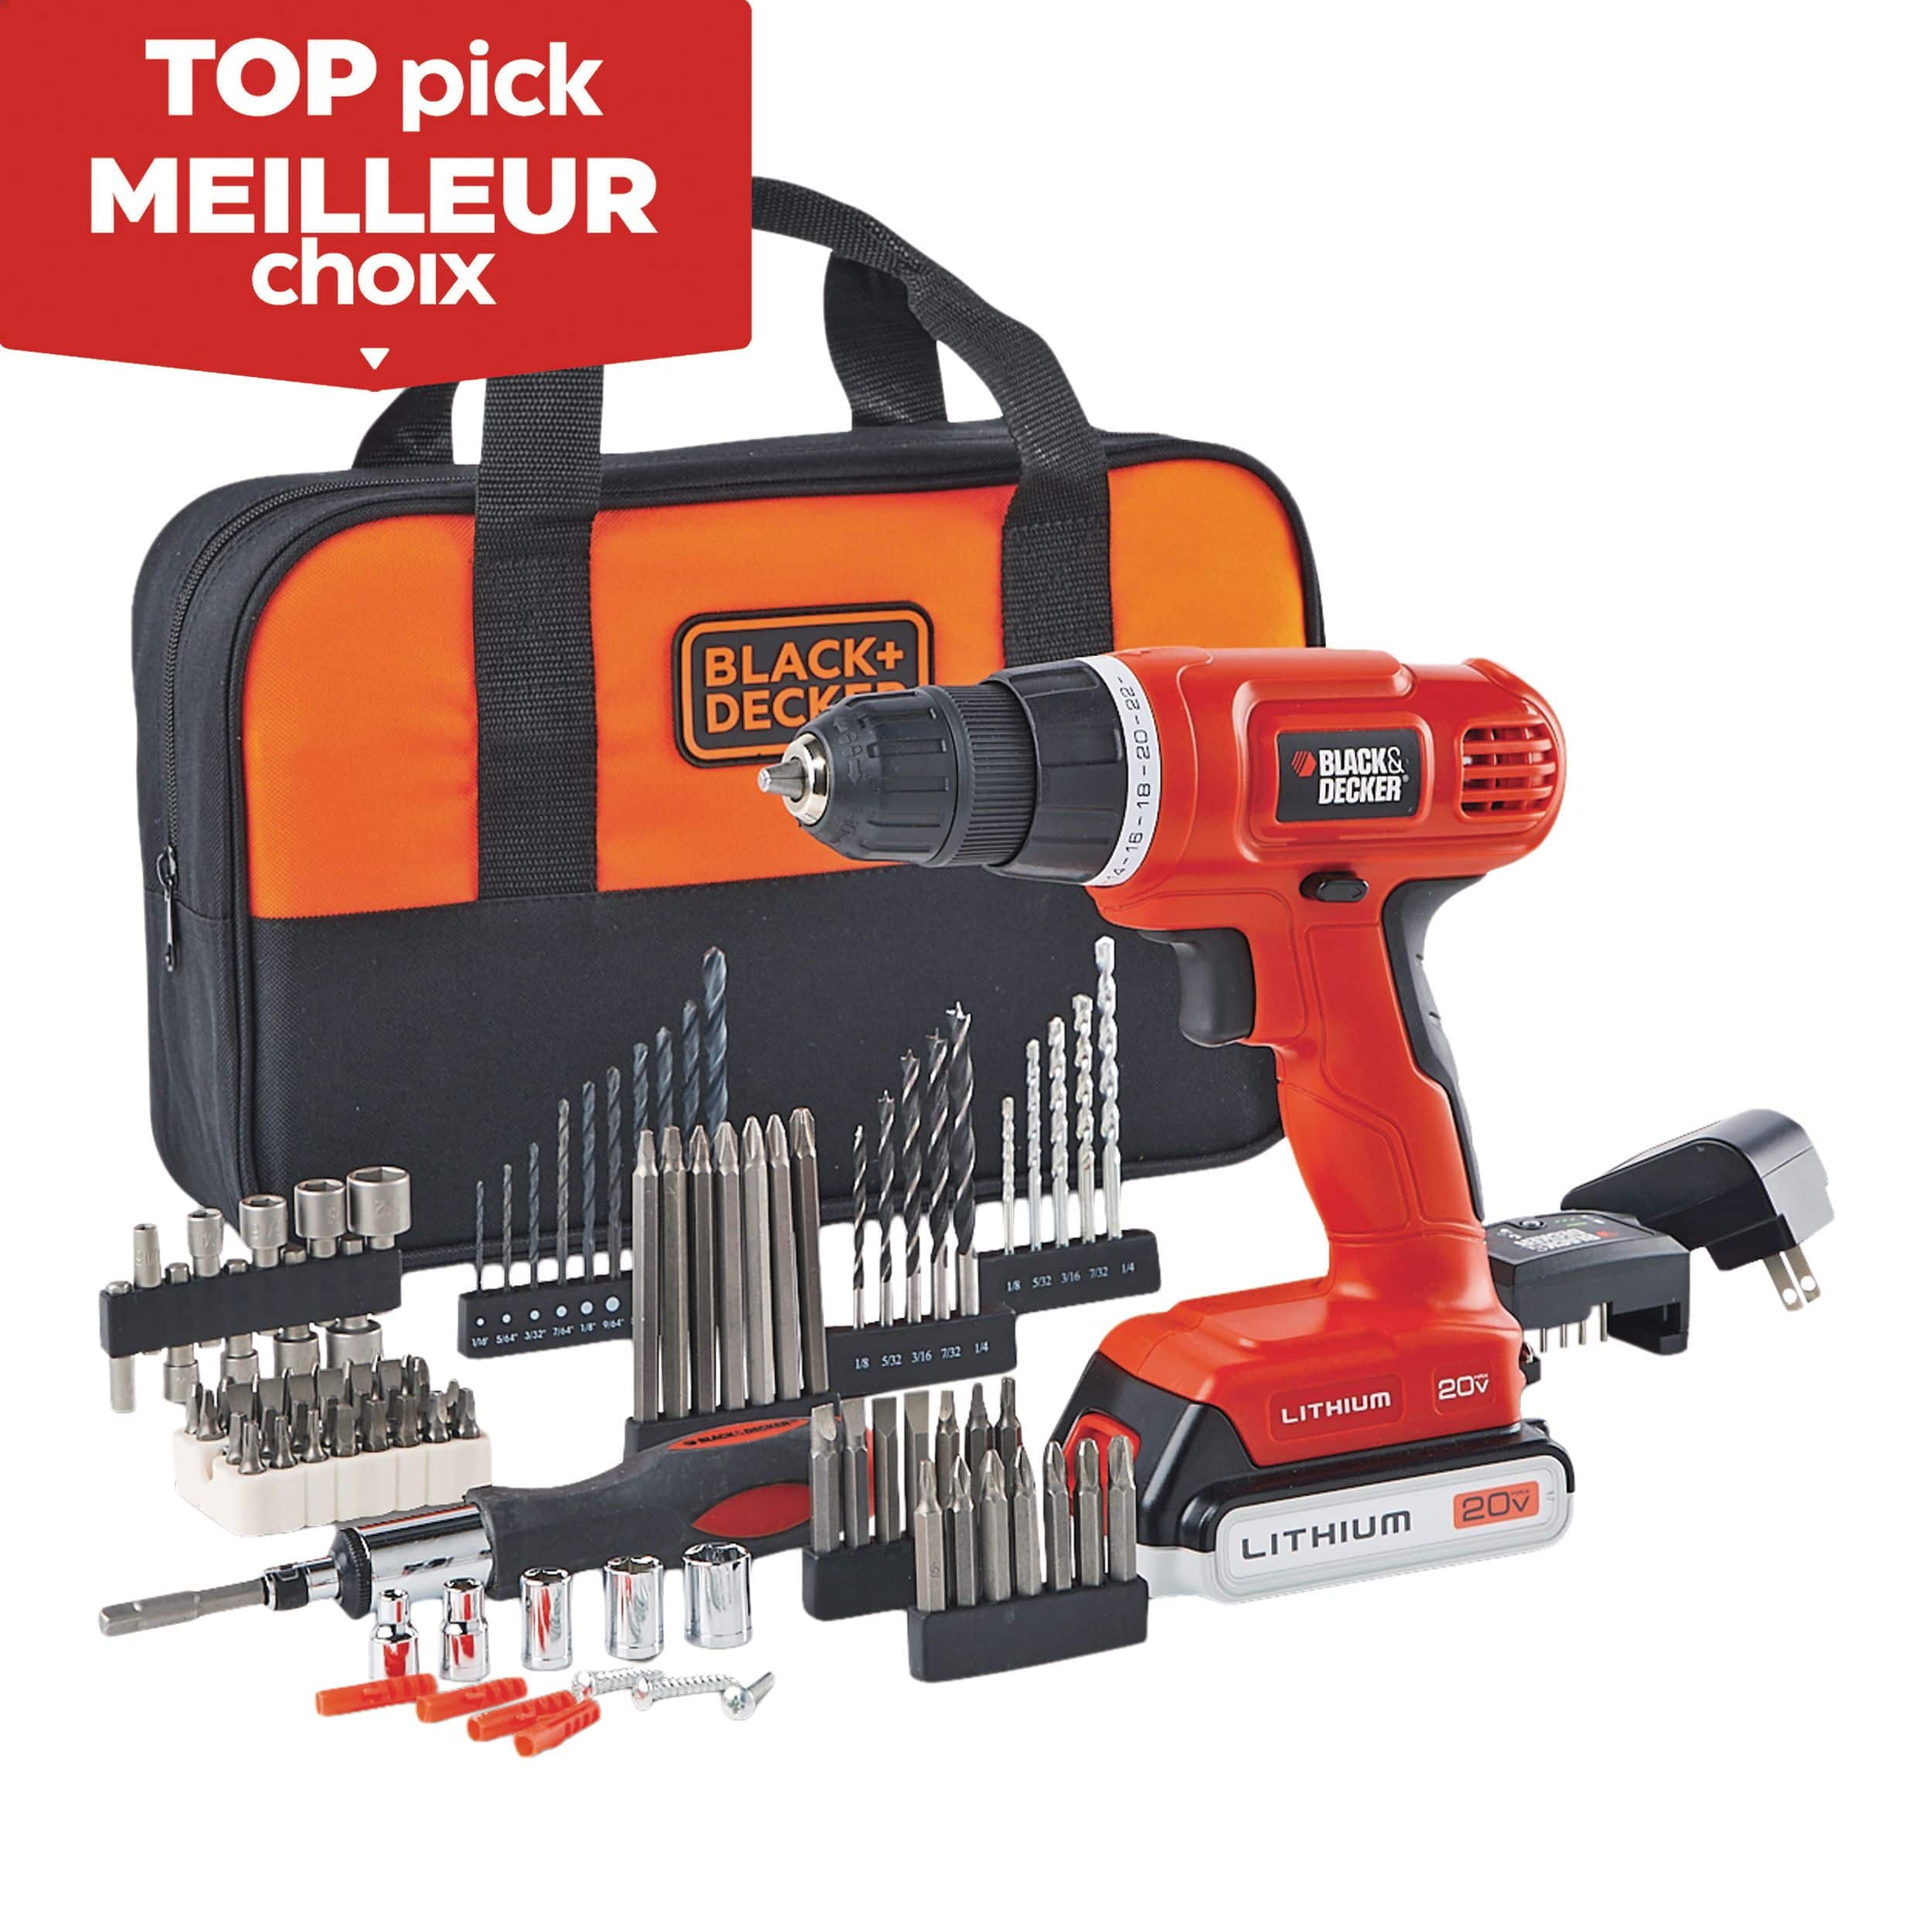 https://media-www.canadiantire.ca/product/fixing/tools/portable-power-tools/0543199/b-d-20v-li-ion-drill-with-100pc-accessory-case-8136c948-7ac7-4225-a59f-94af05065647-jpgrendition.jpg